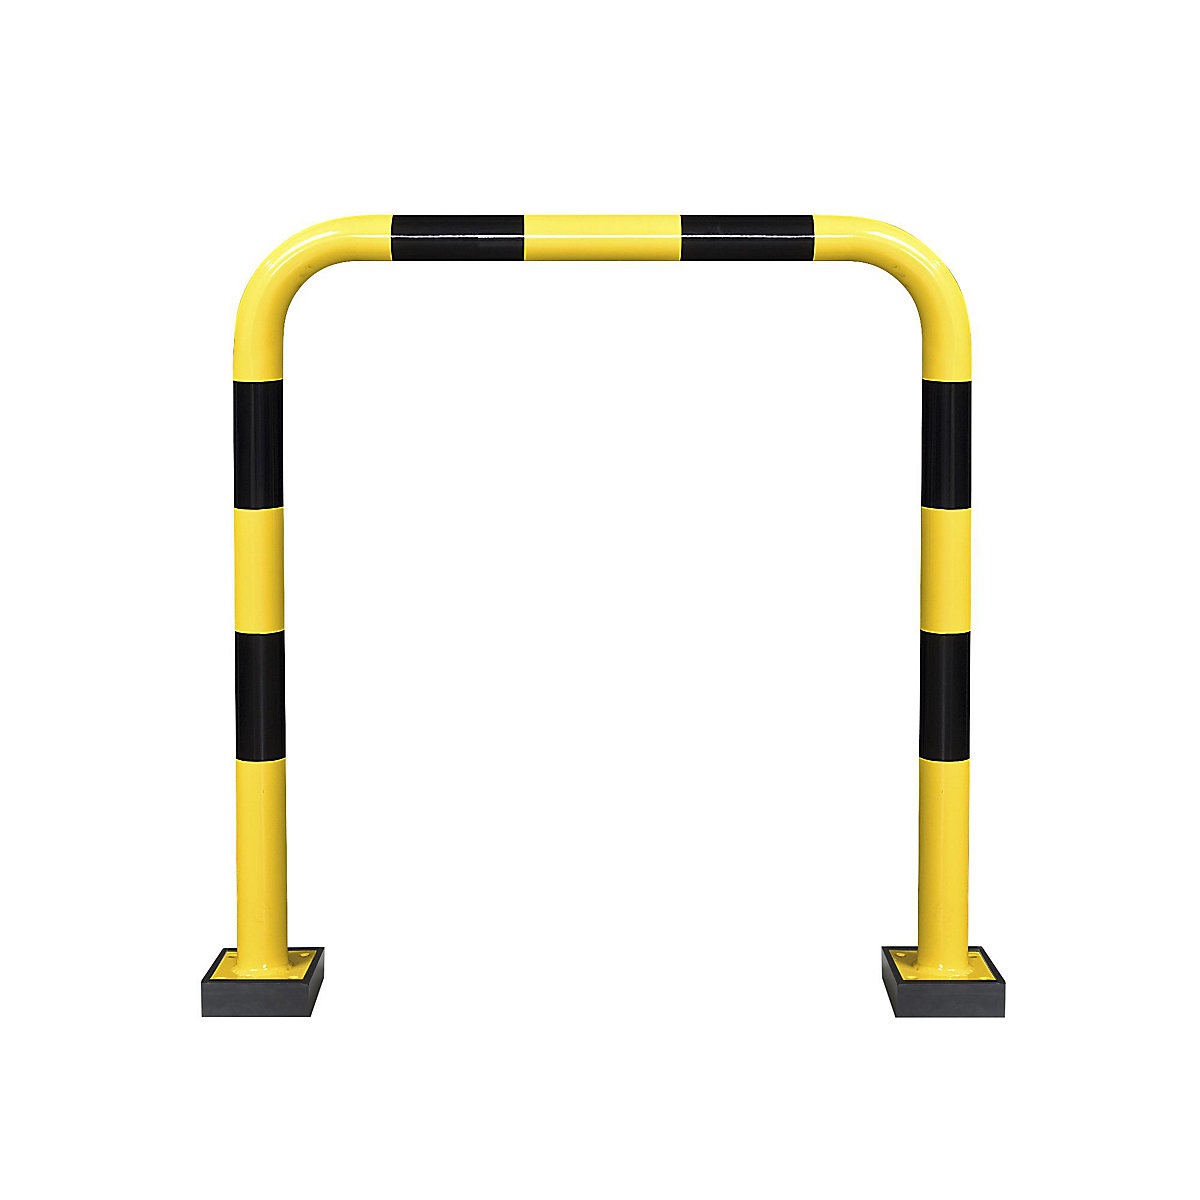 Crash protection bar, flexible, for indoor use, HxW 1240 x 1000 mm